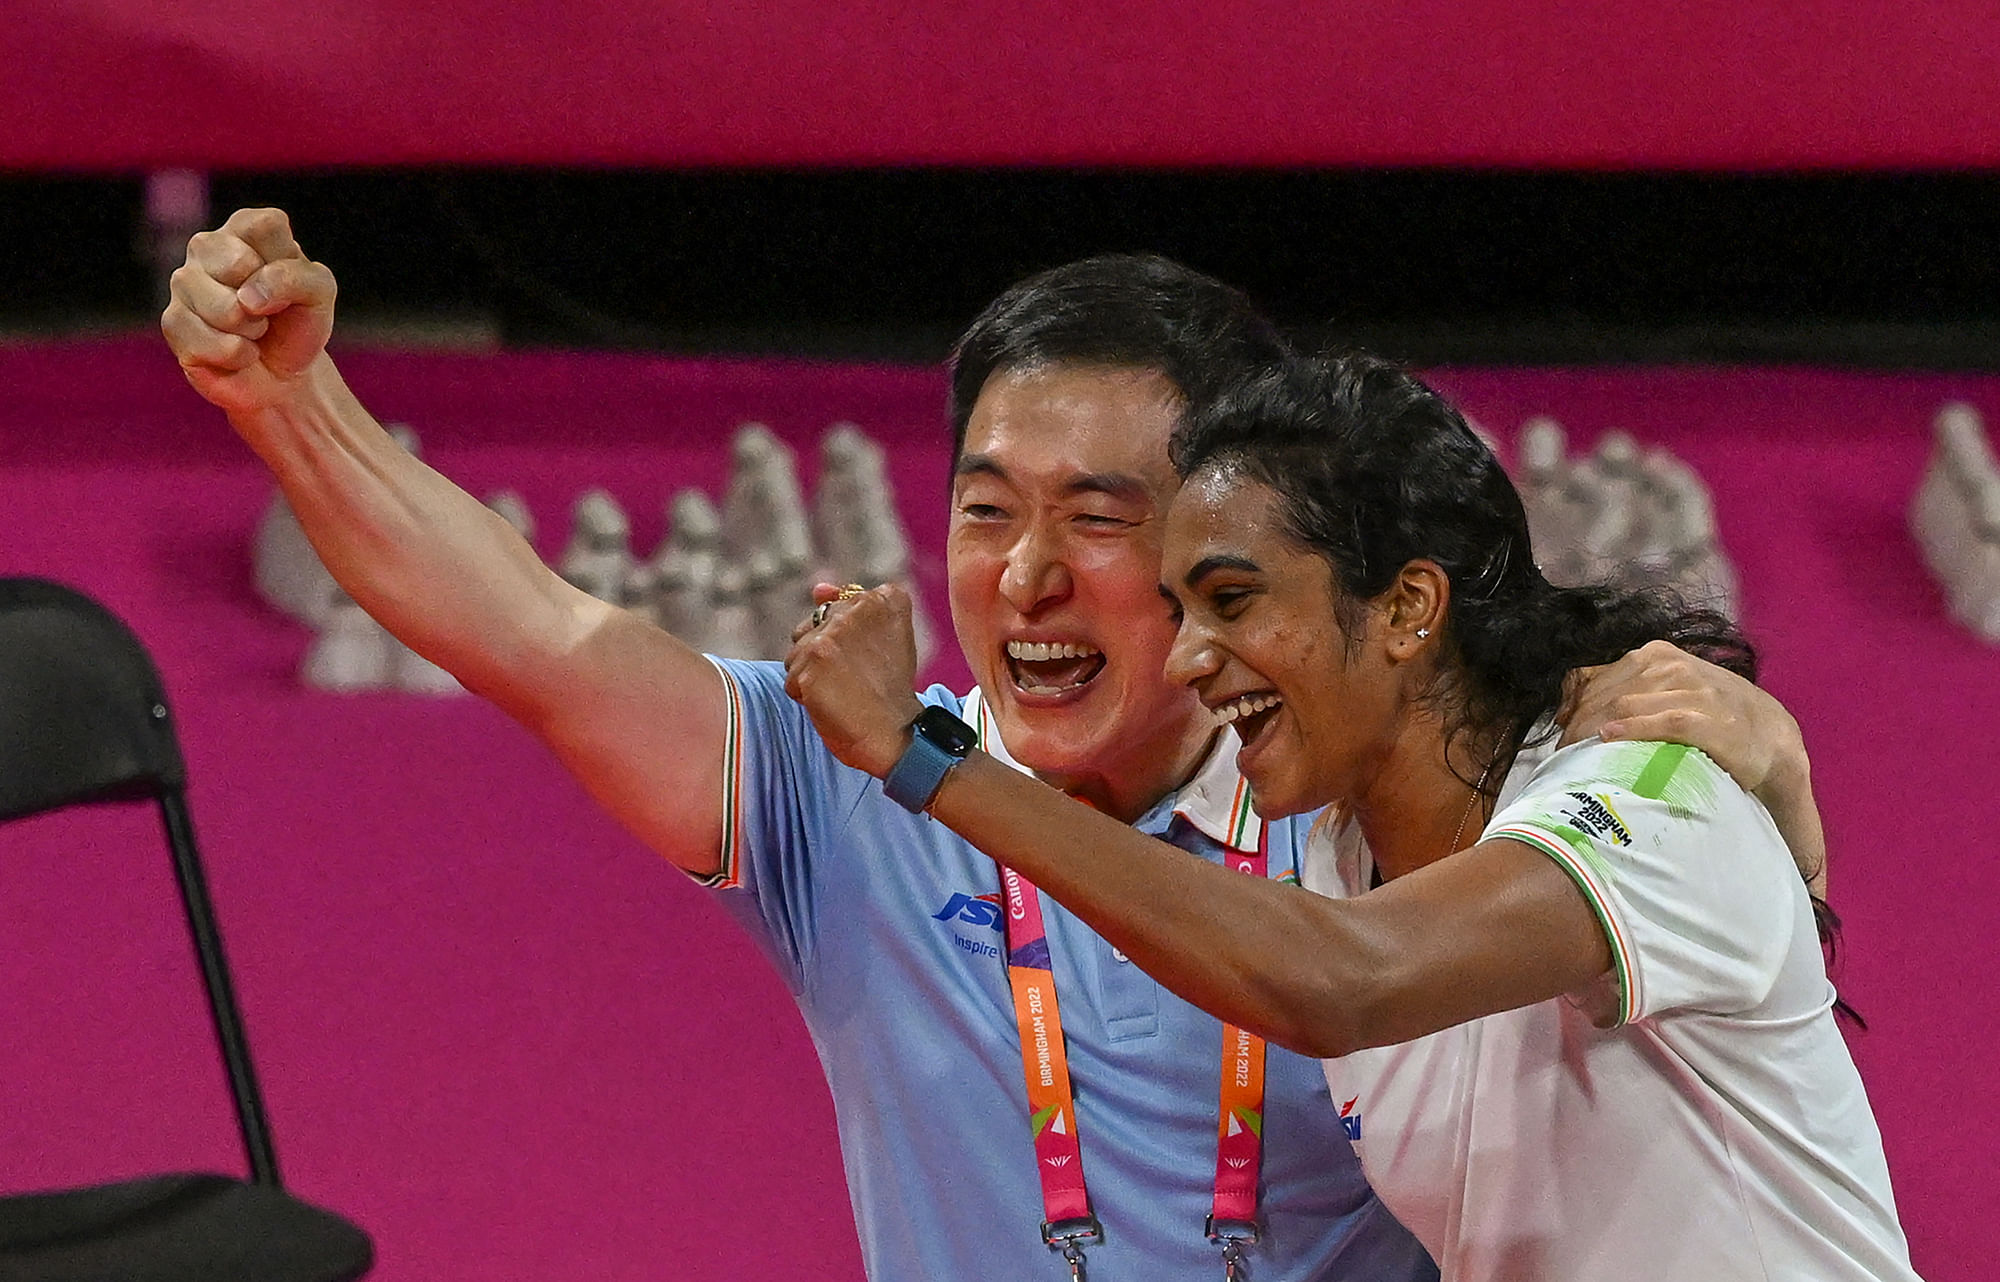 CWG 2022 PV Sindhu and How Nerves of Steel Meet Medals of Gold